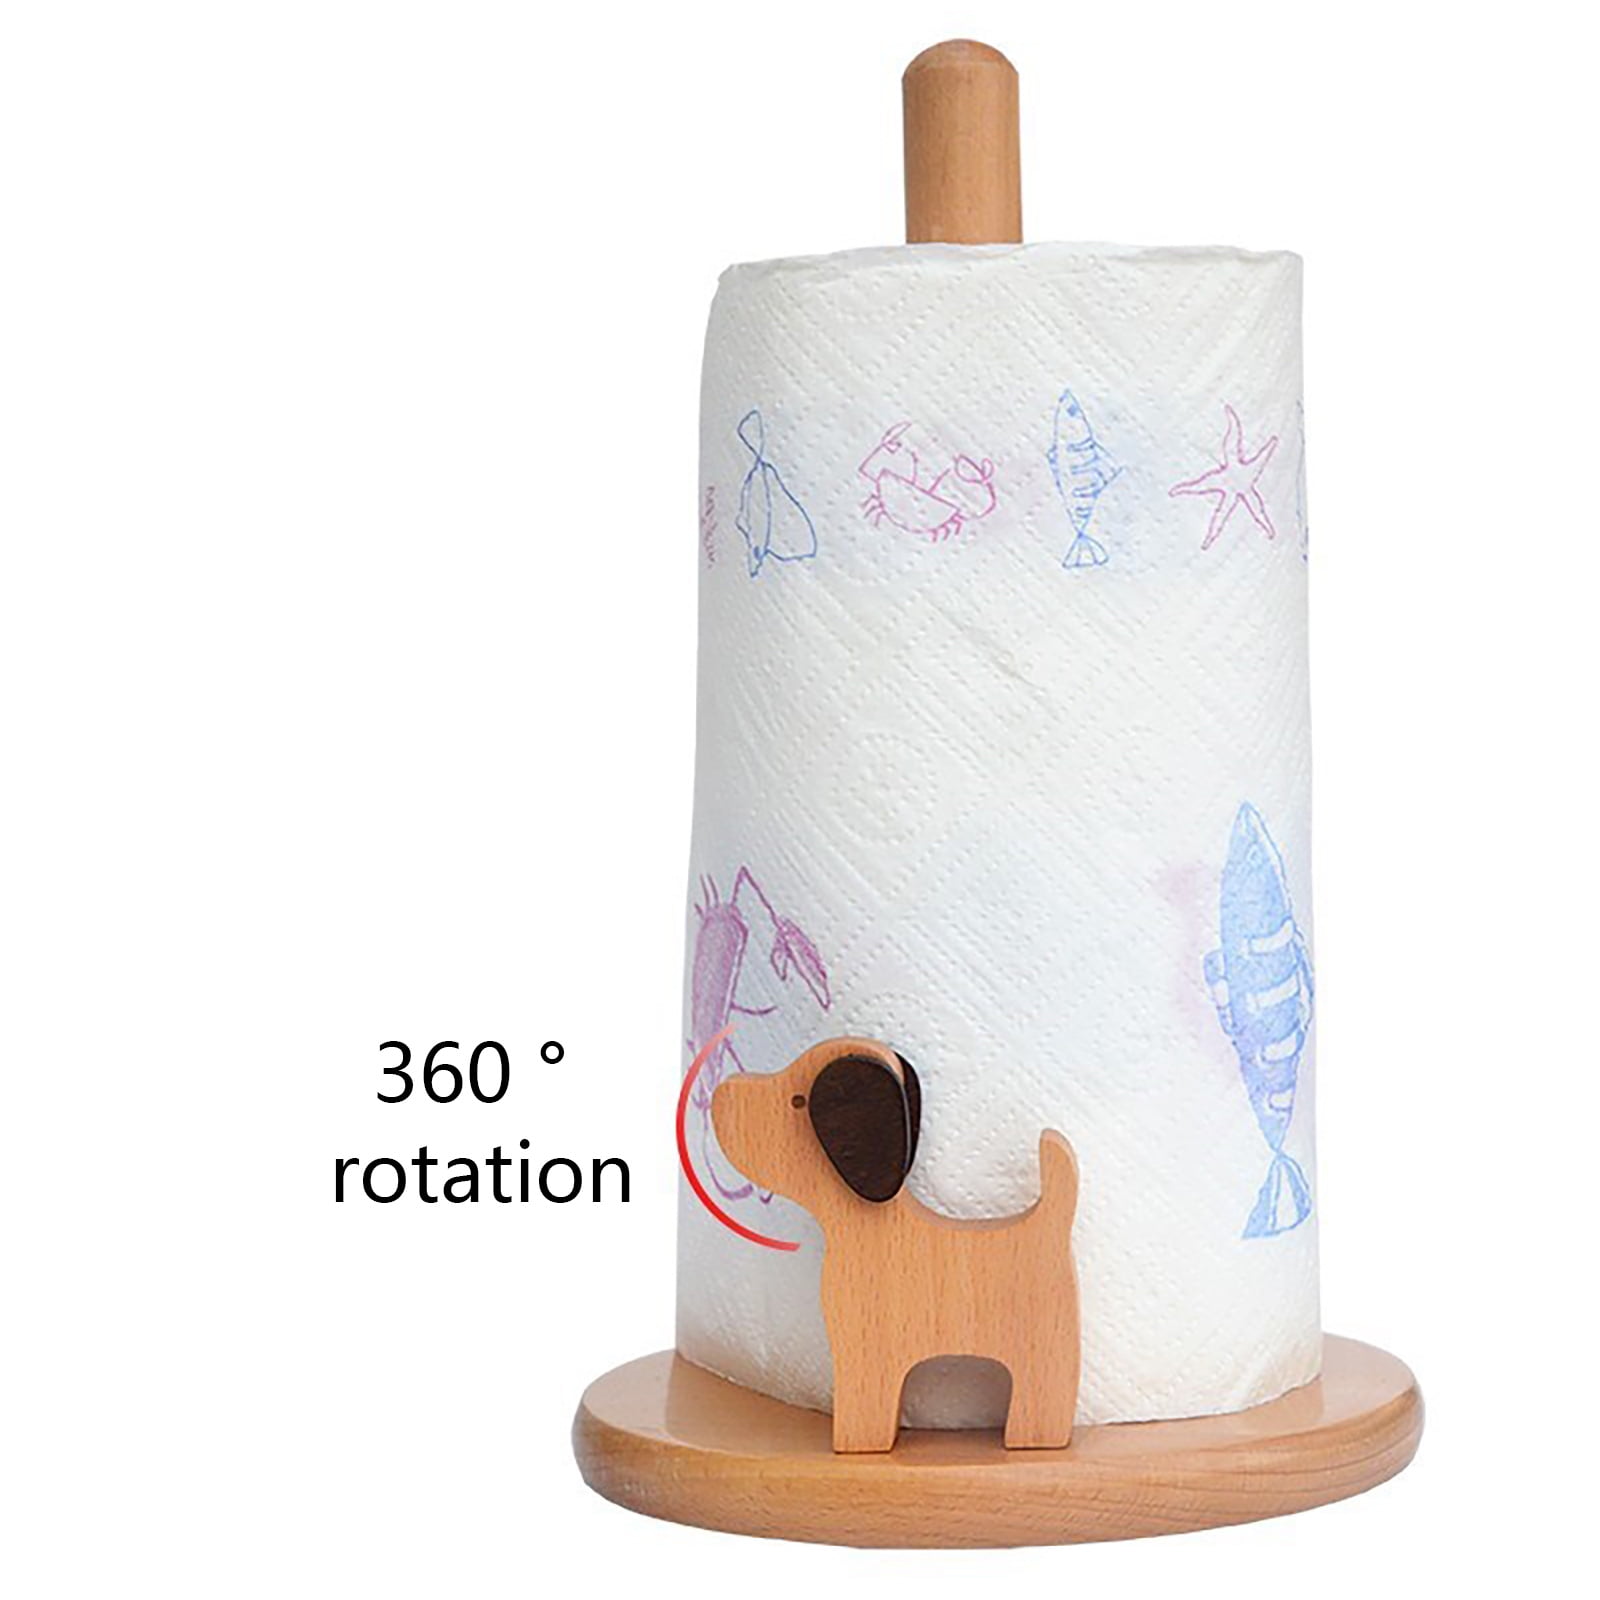 Buy Wood Paper Towel Holder Stand Free Standing Vintage Toilet Bathroom Paper  Towel Roll Hold Industrial Pipe Fitting by Just Green Tech on Dot & Bo